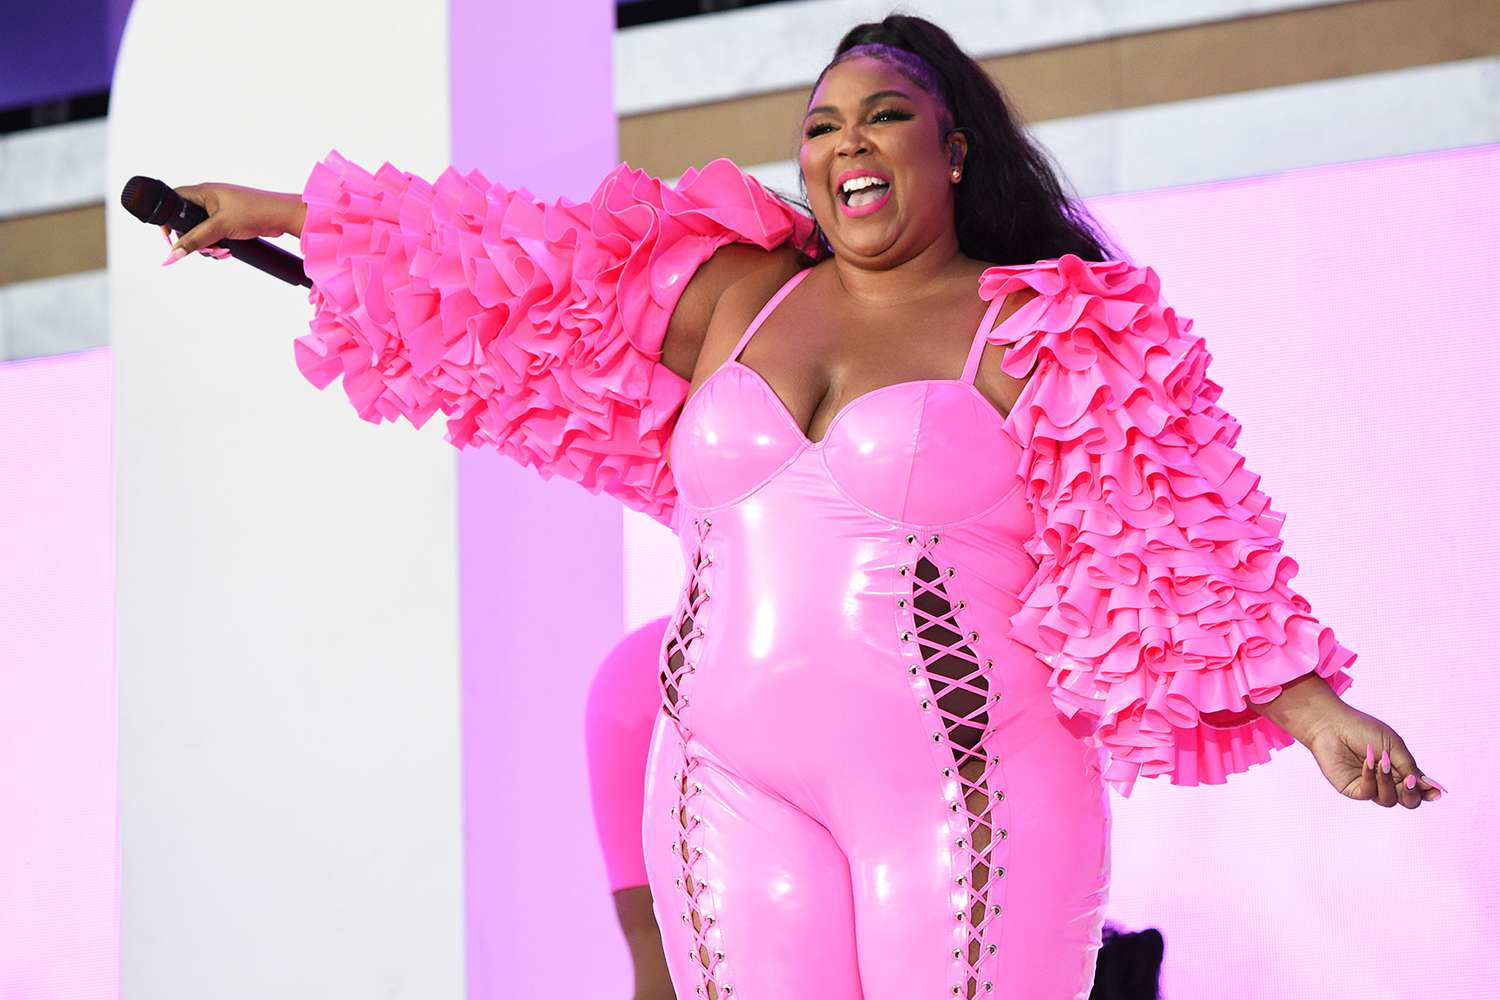 Lizzo in her pink outfit